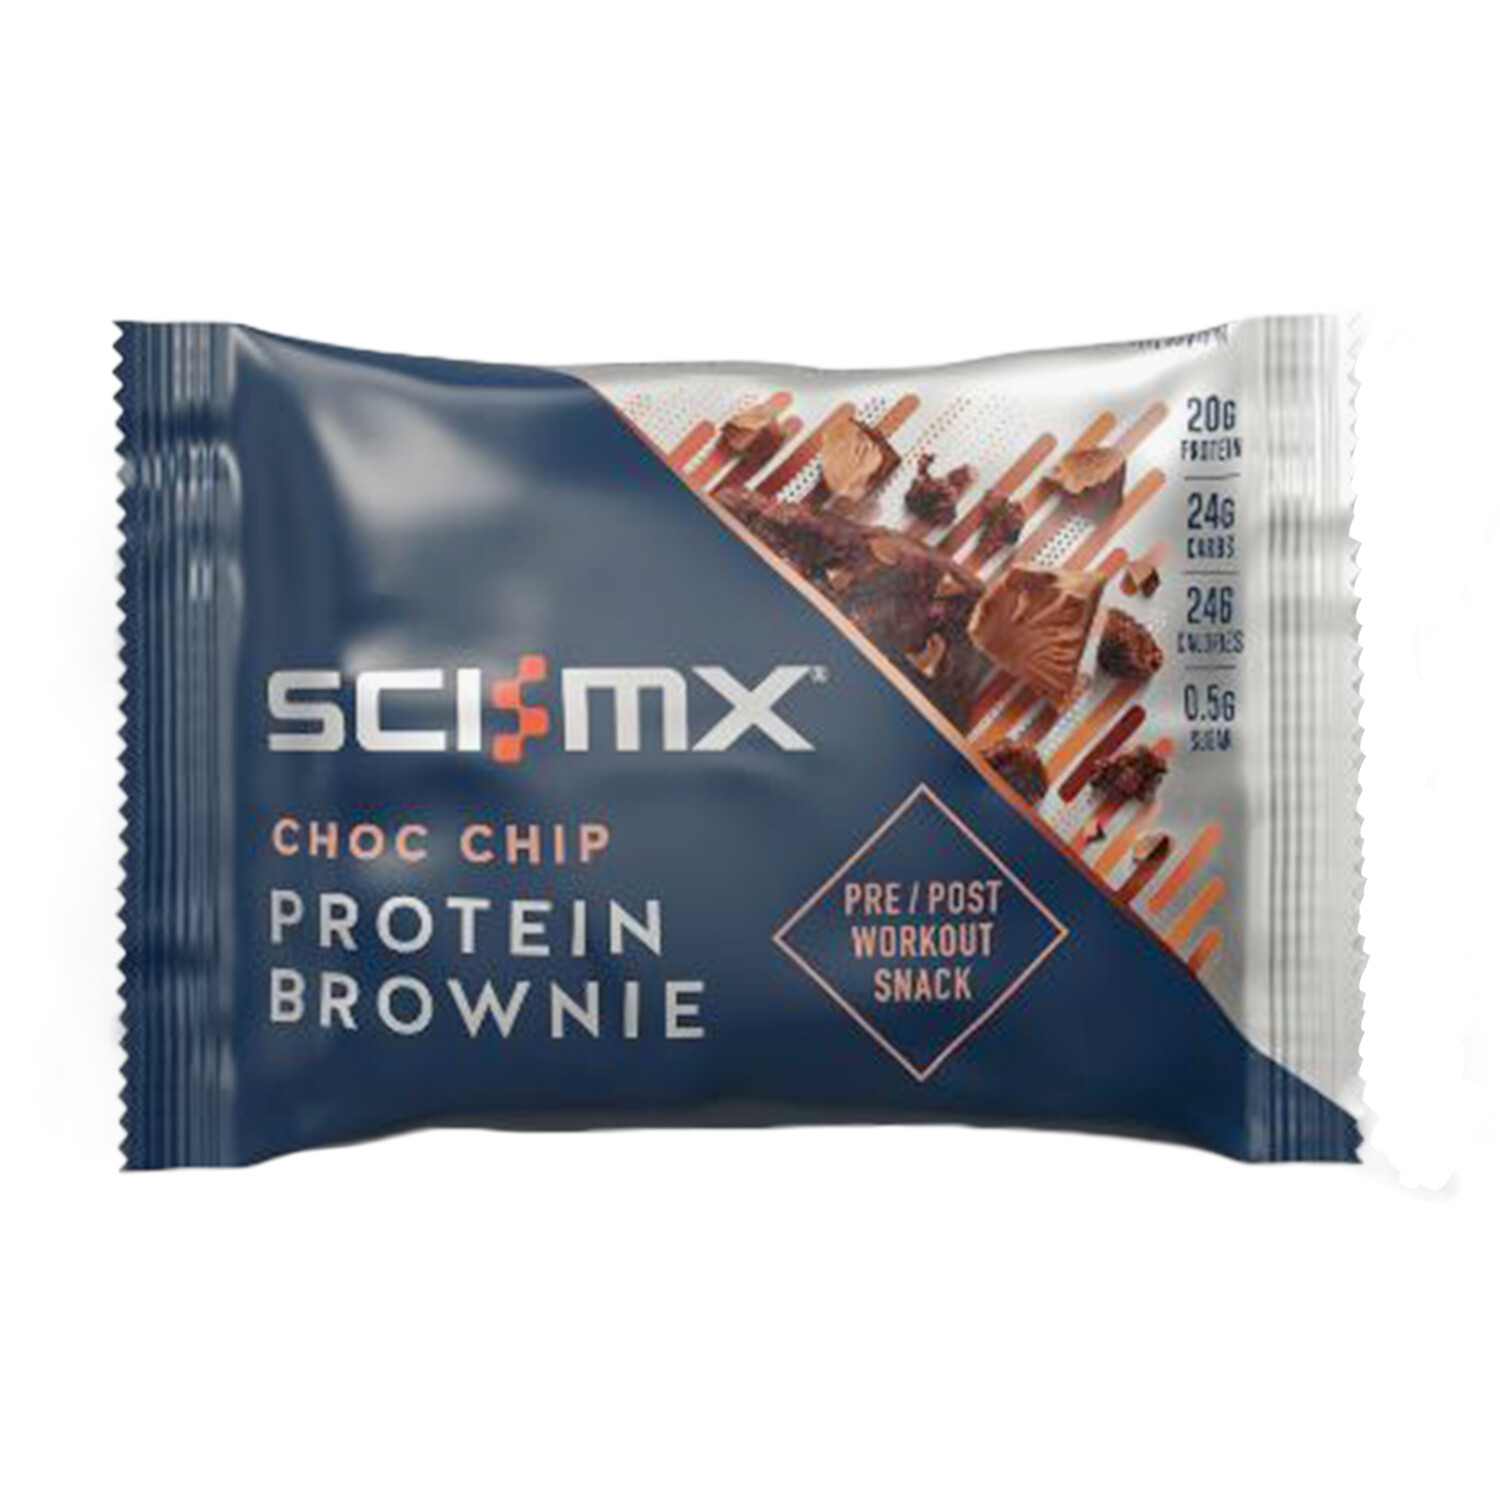 Sci-Mx Chocolate Chip Protein Brownie Image